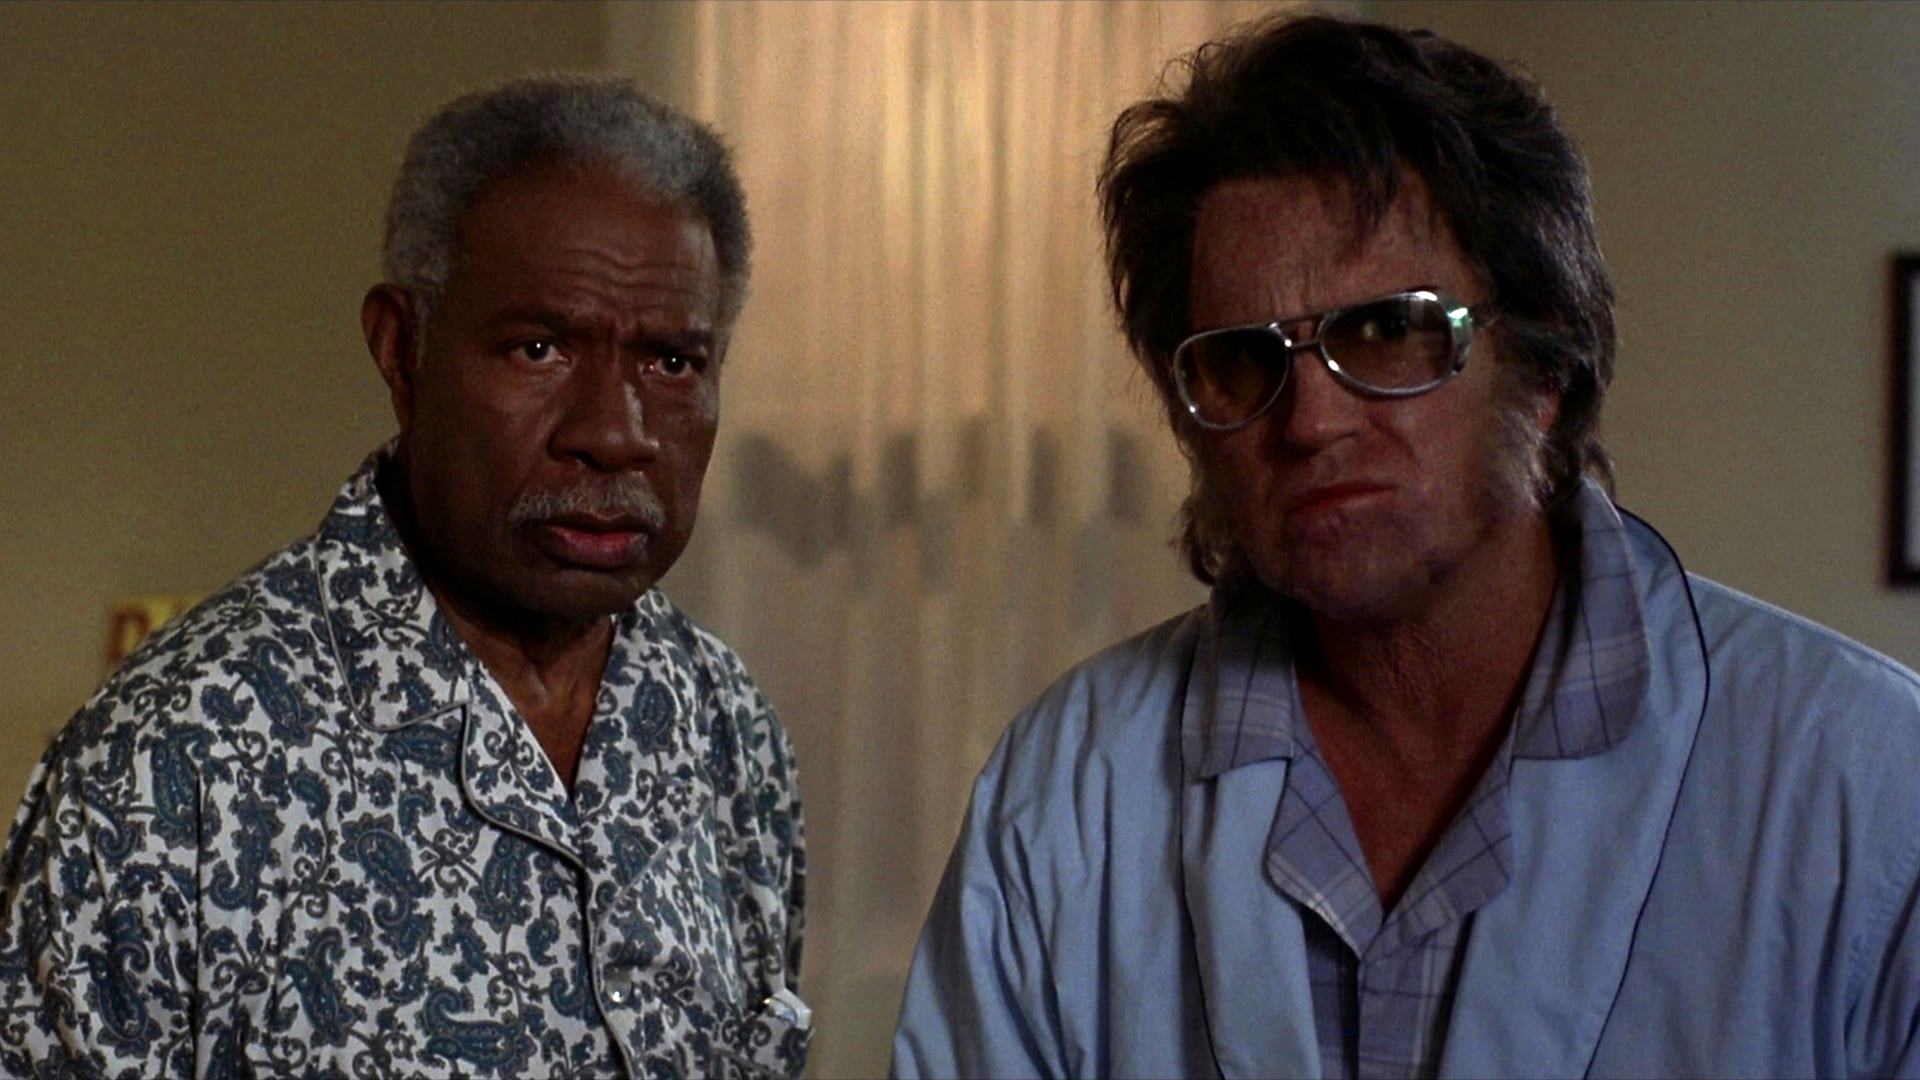 Ossie Davis as JFK and Bruce Campbell as Elvis Presley in Bubba Ho-Tep (2002)